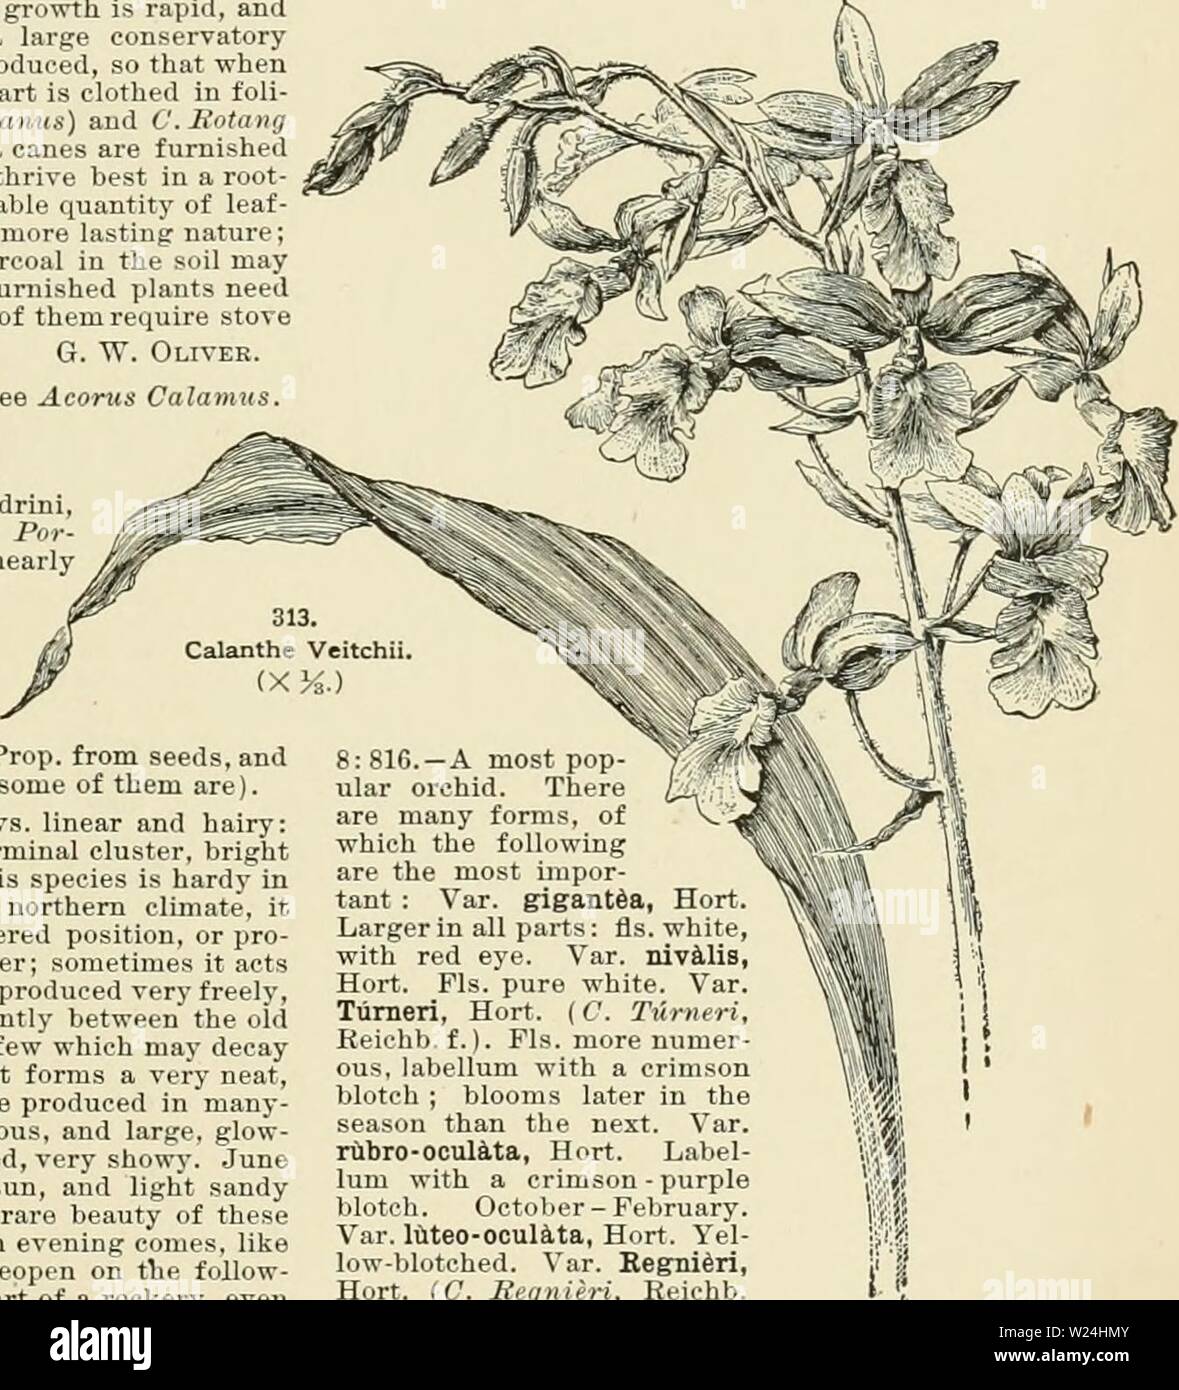 Archive image from page 244 of Cyclopedia of American horticulture, comprising. Cyclopedia of American horticulture, comprising suggestions for cultivation of horticultural plants, descriptions of the species of fruits, vegetables, flowers, and ornamental plants sold in the United States and Canada, together with geographical and biographical sketches  cyclopediaofam01bail Year: 1900  CALAMOVILFA apparently limited to the sandy swamps and pine bar- rens of New Jersey. Now in cultivation as an orna- nK-utal grass. p. B. Kennedy. CALAMPfiLlS is Eccremocat-pus. CALAMUS (Greek tor reed). PalmUcew, Stock Photo